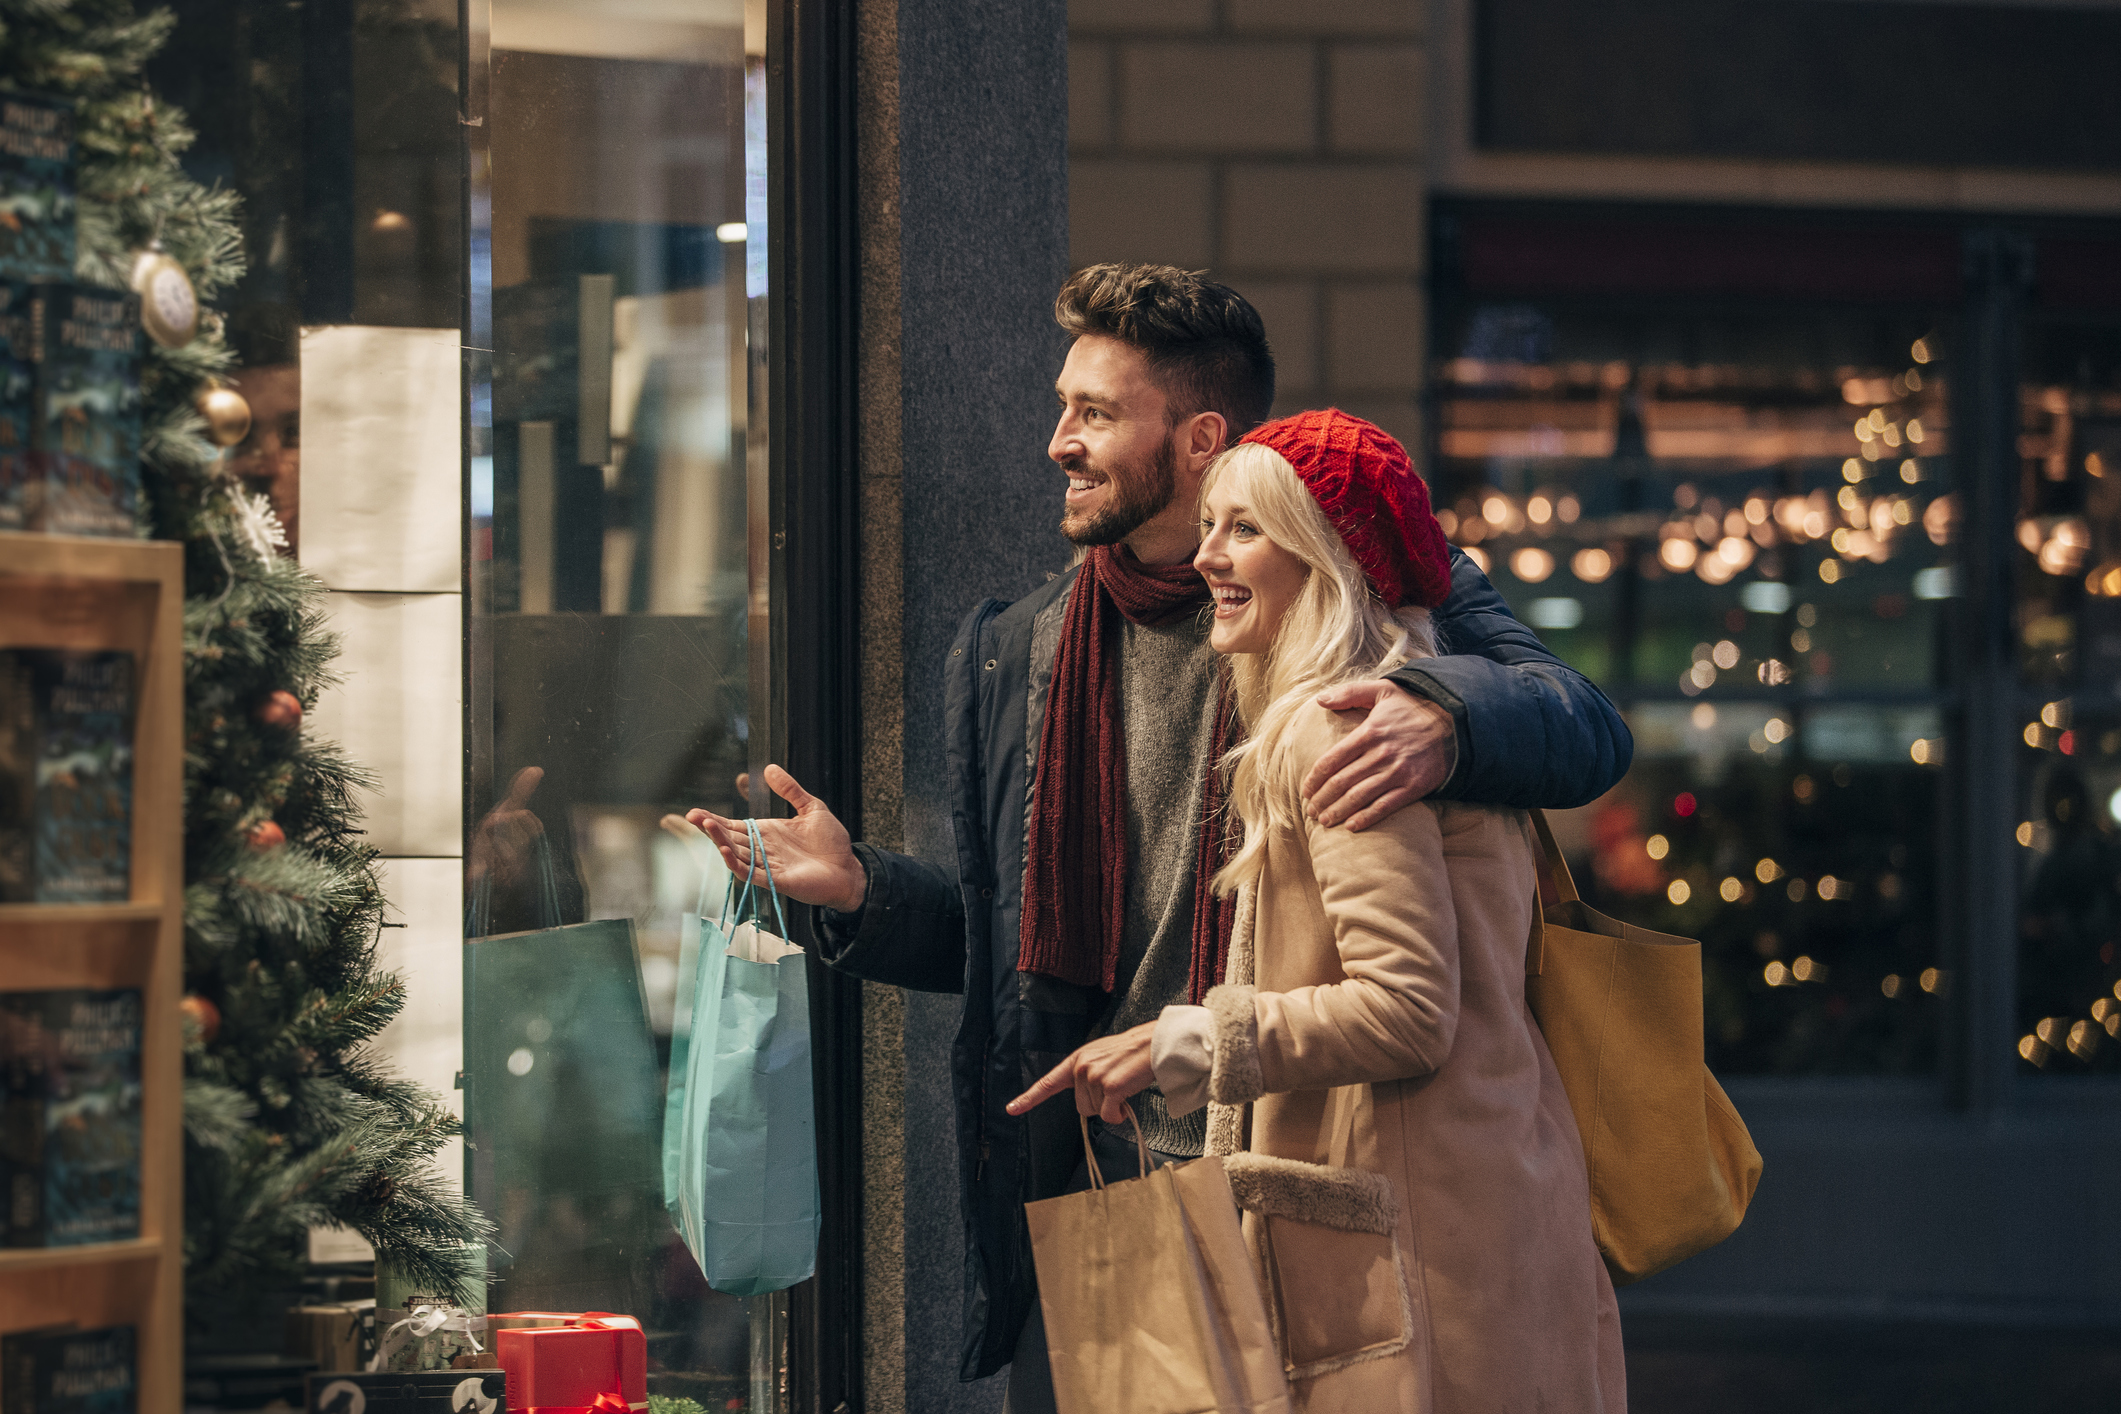 Couple looking in a store window while holiday shopping.